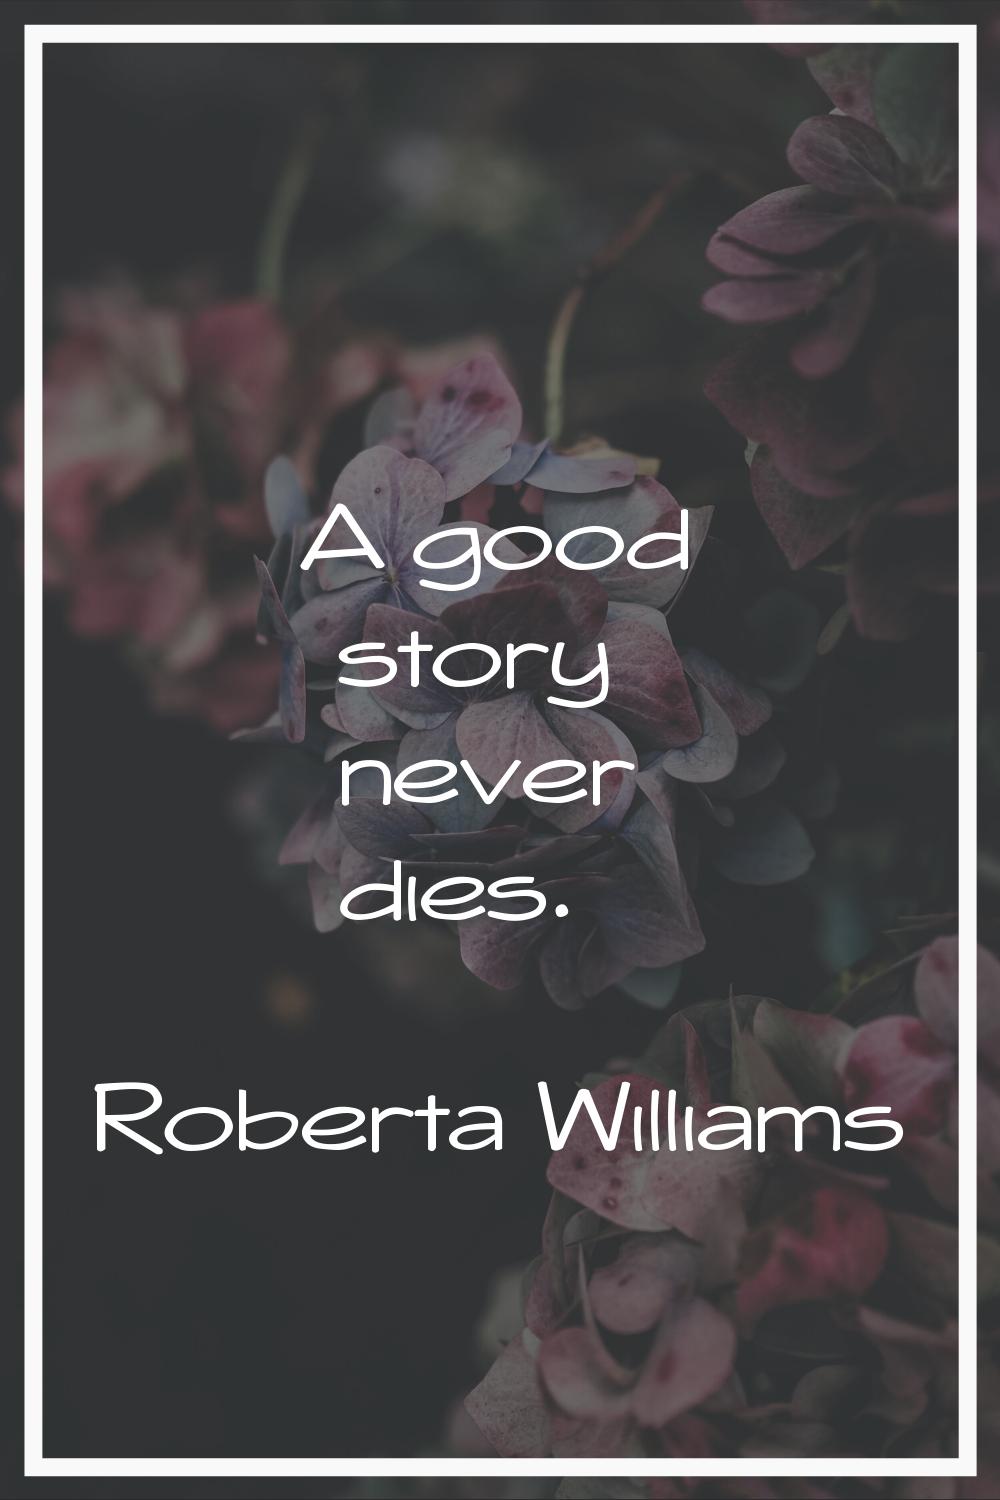 A good story never dies.